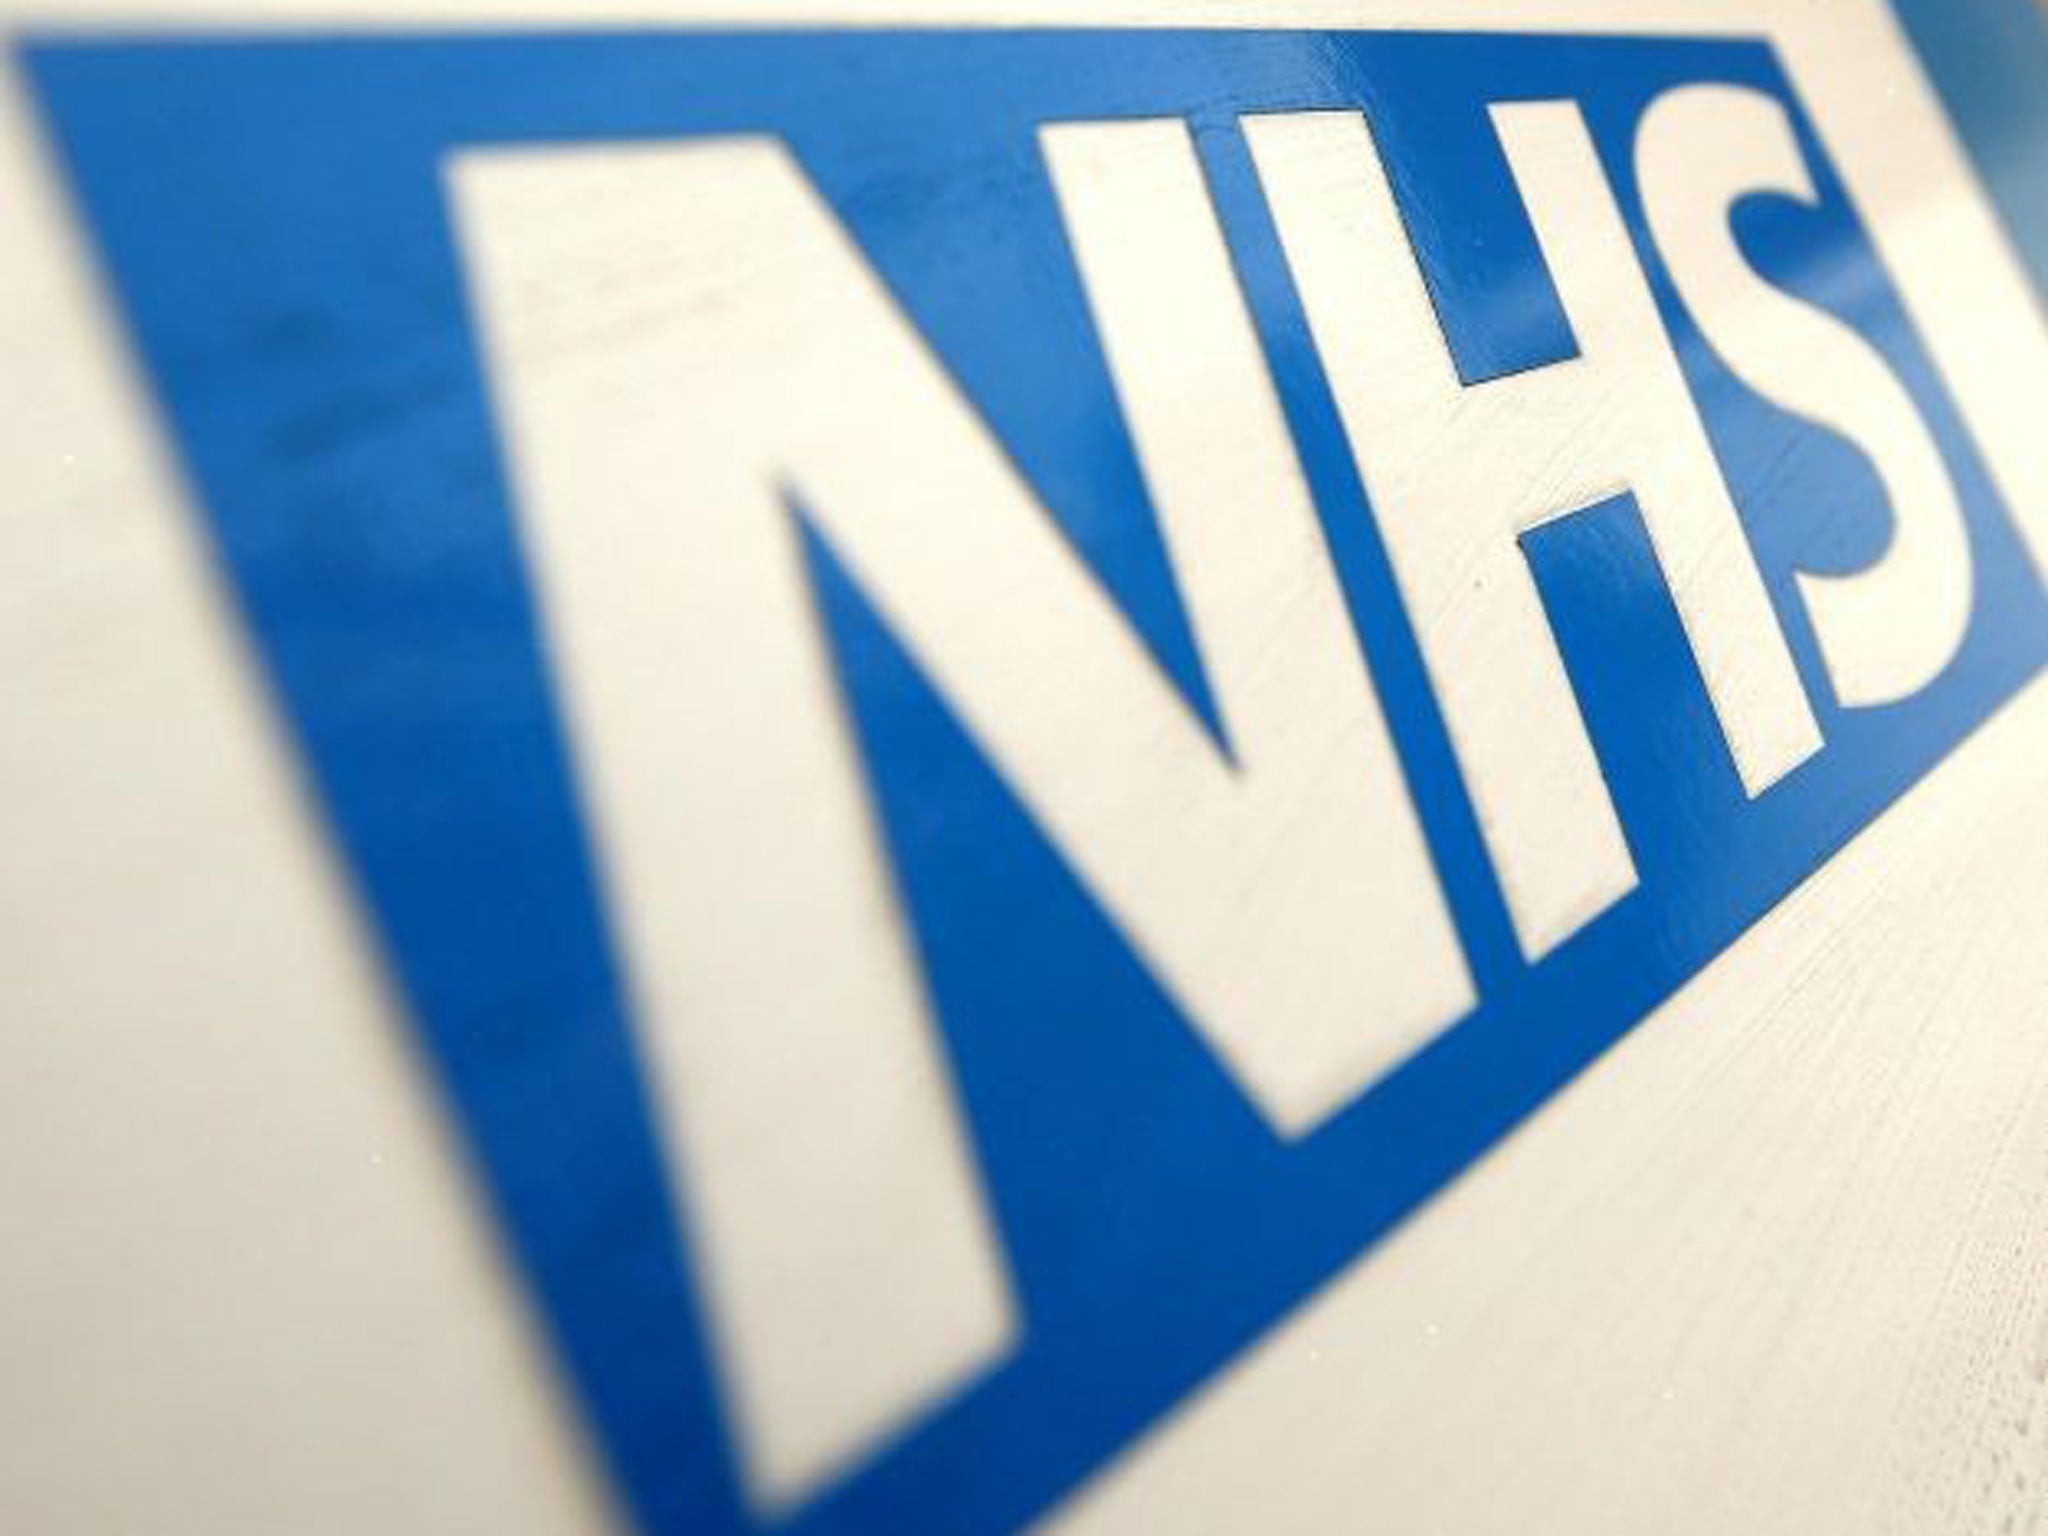 Regional pilots of the NHS's new non-emergency hotline have reported big problems